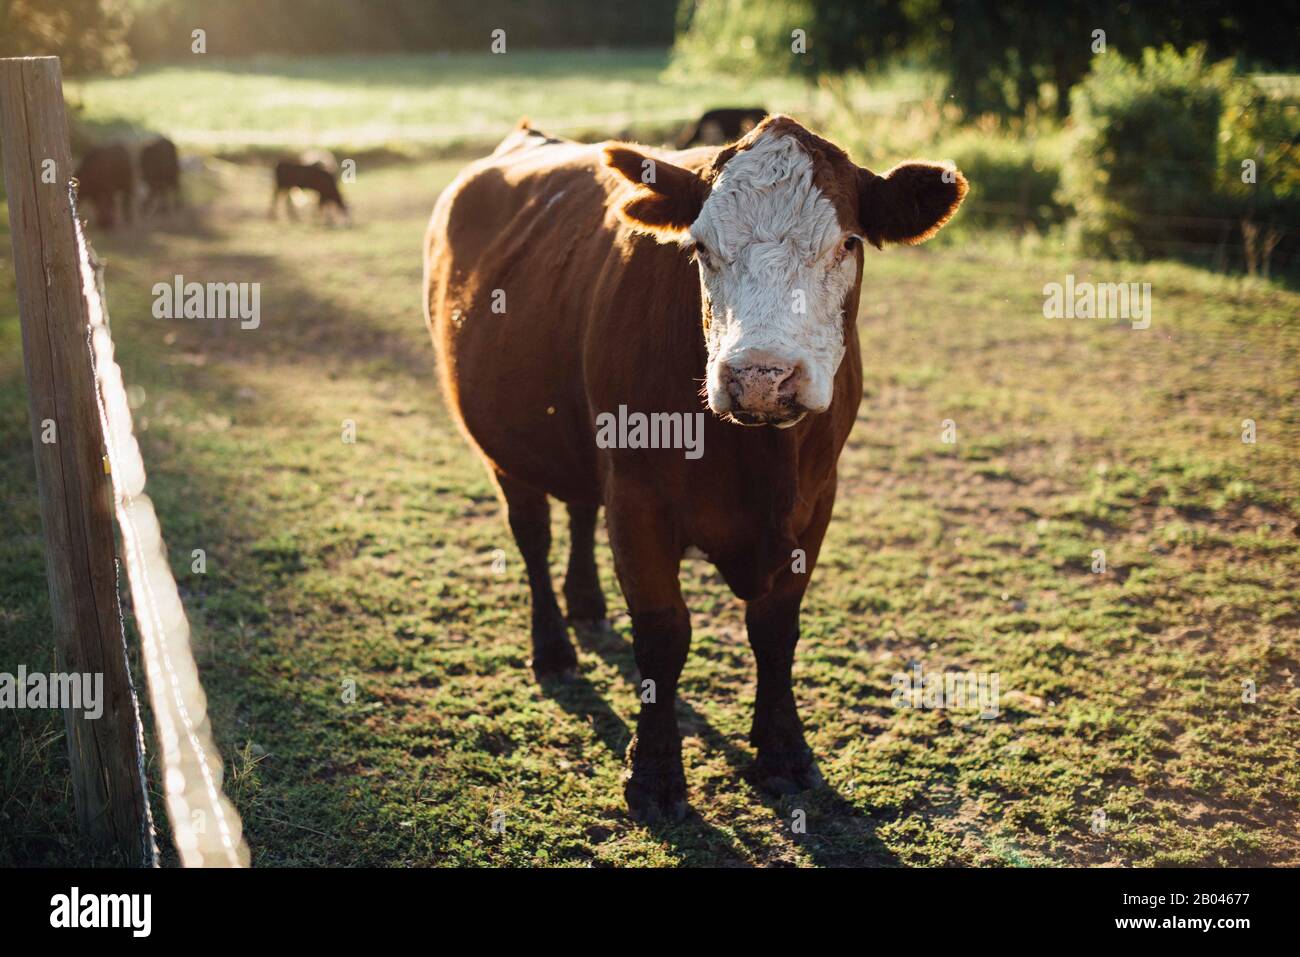 Sweet cow in early morning sun Stock Photo